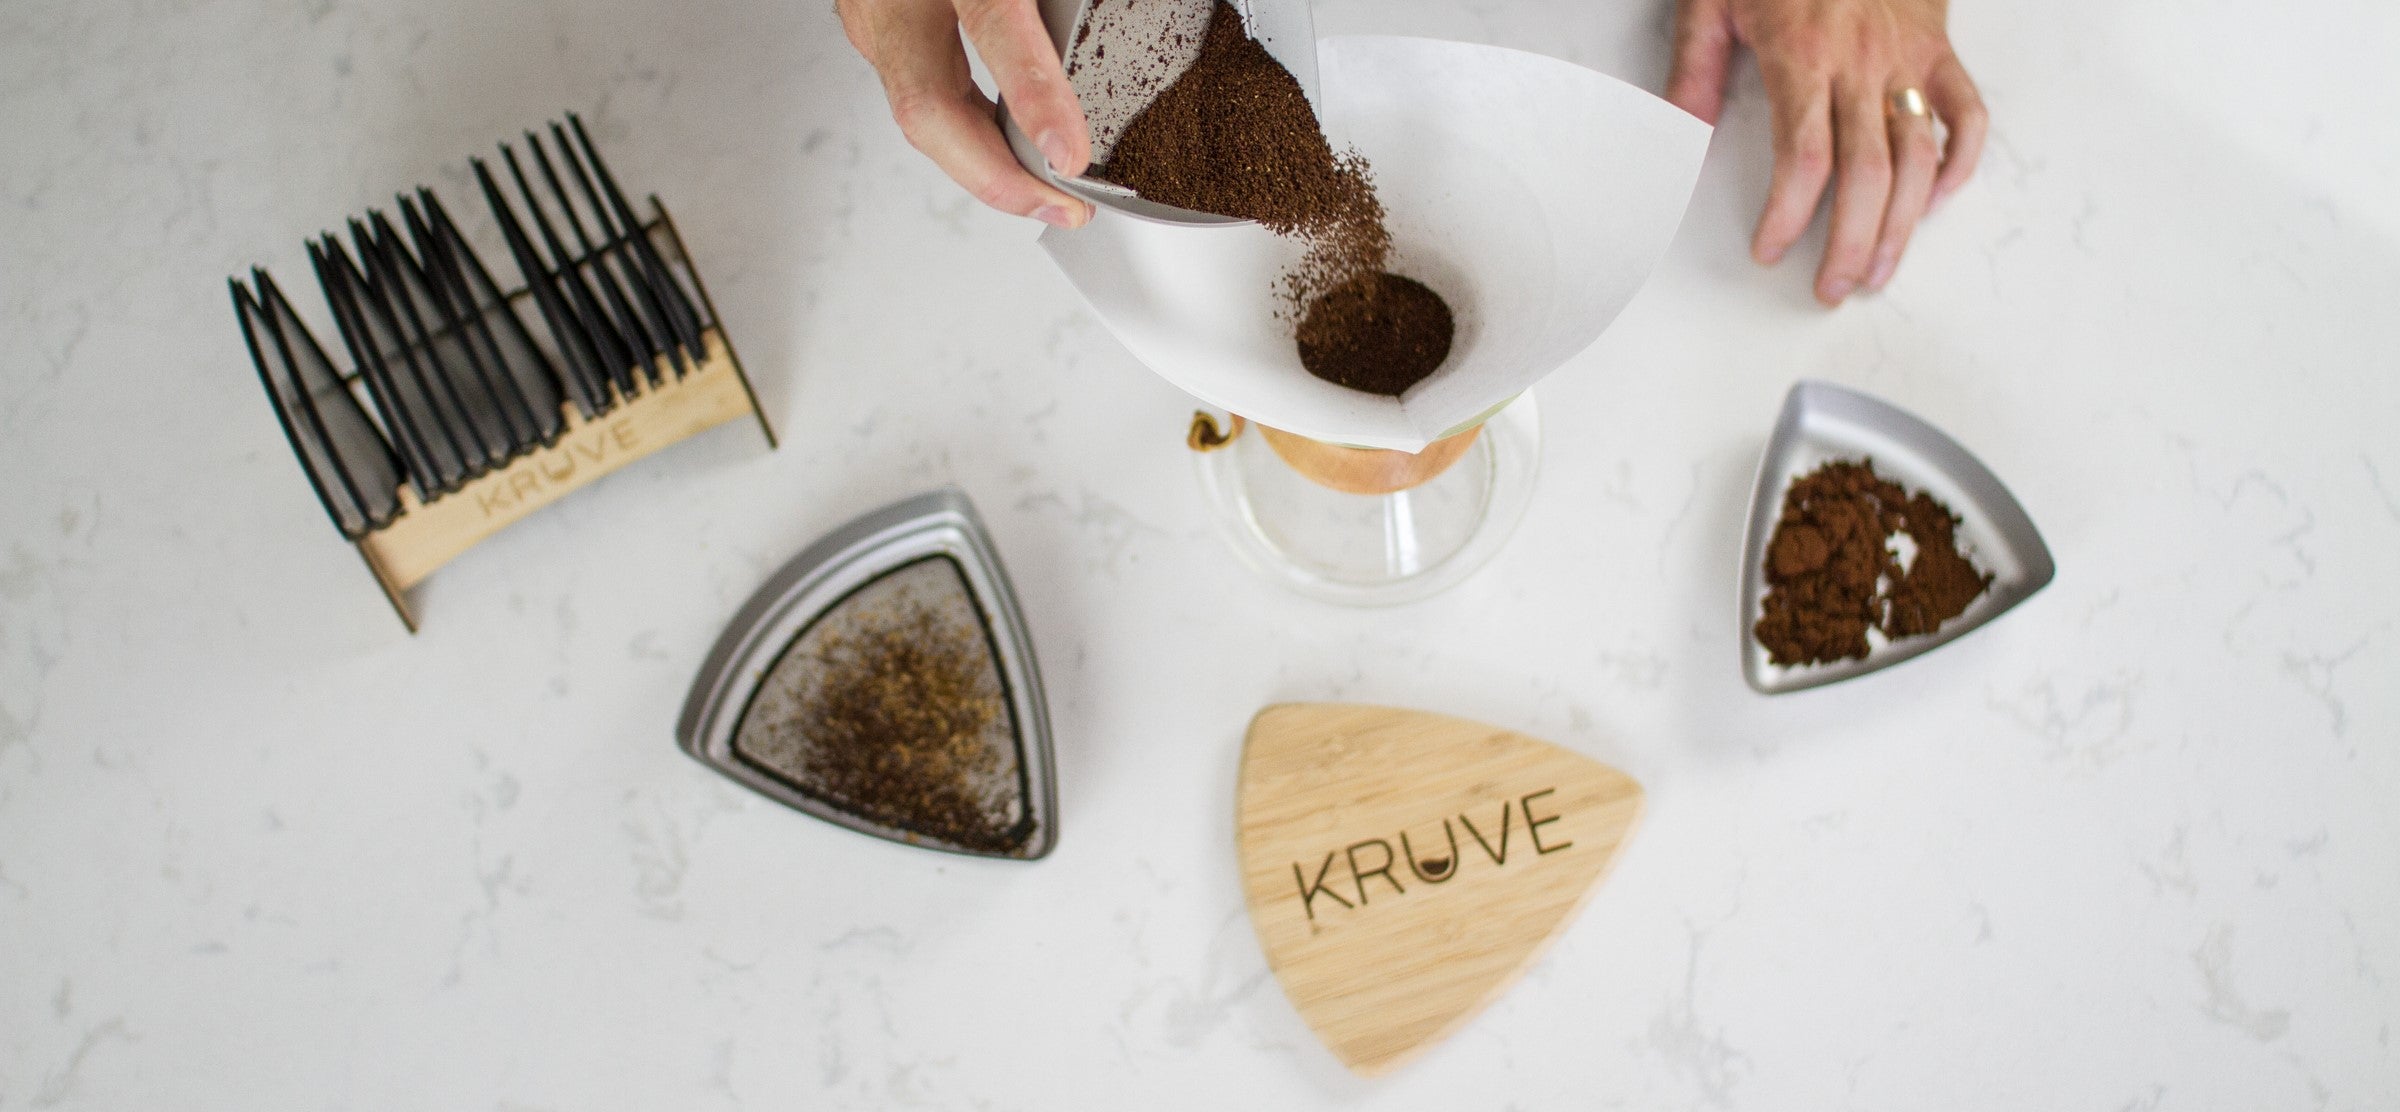 Sifting Your Way to a Better Cup? Consider This First...